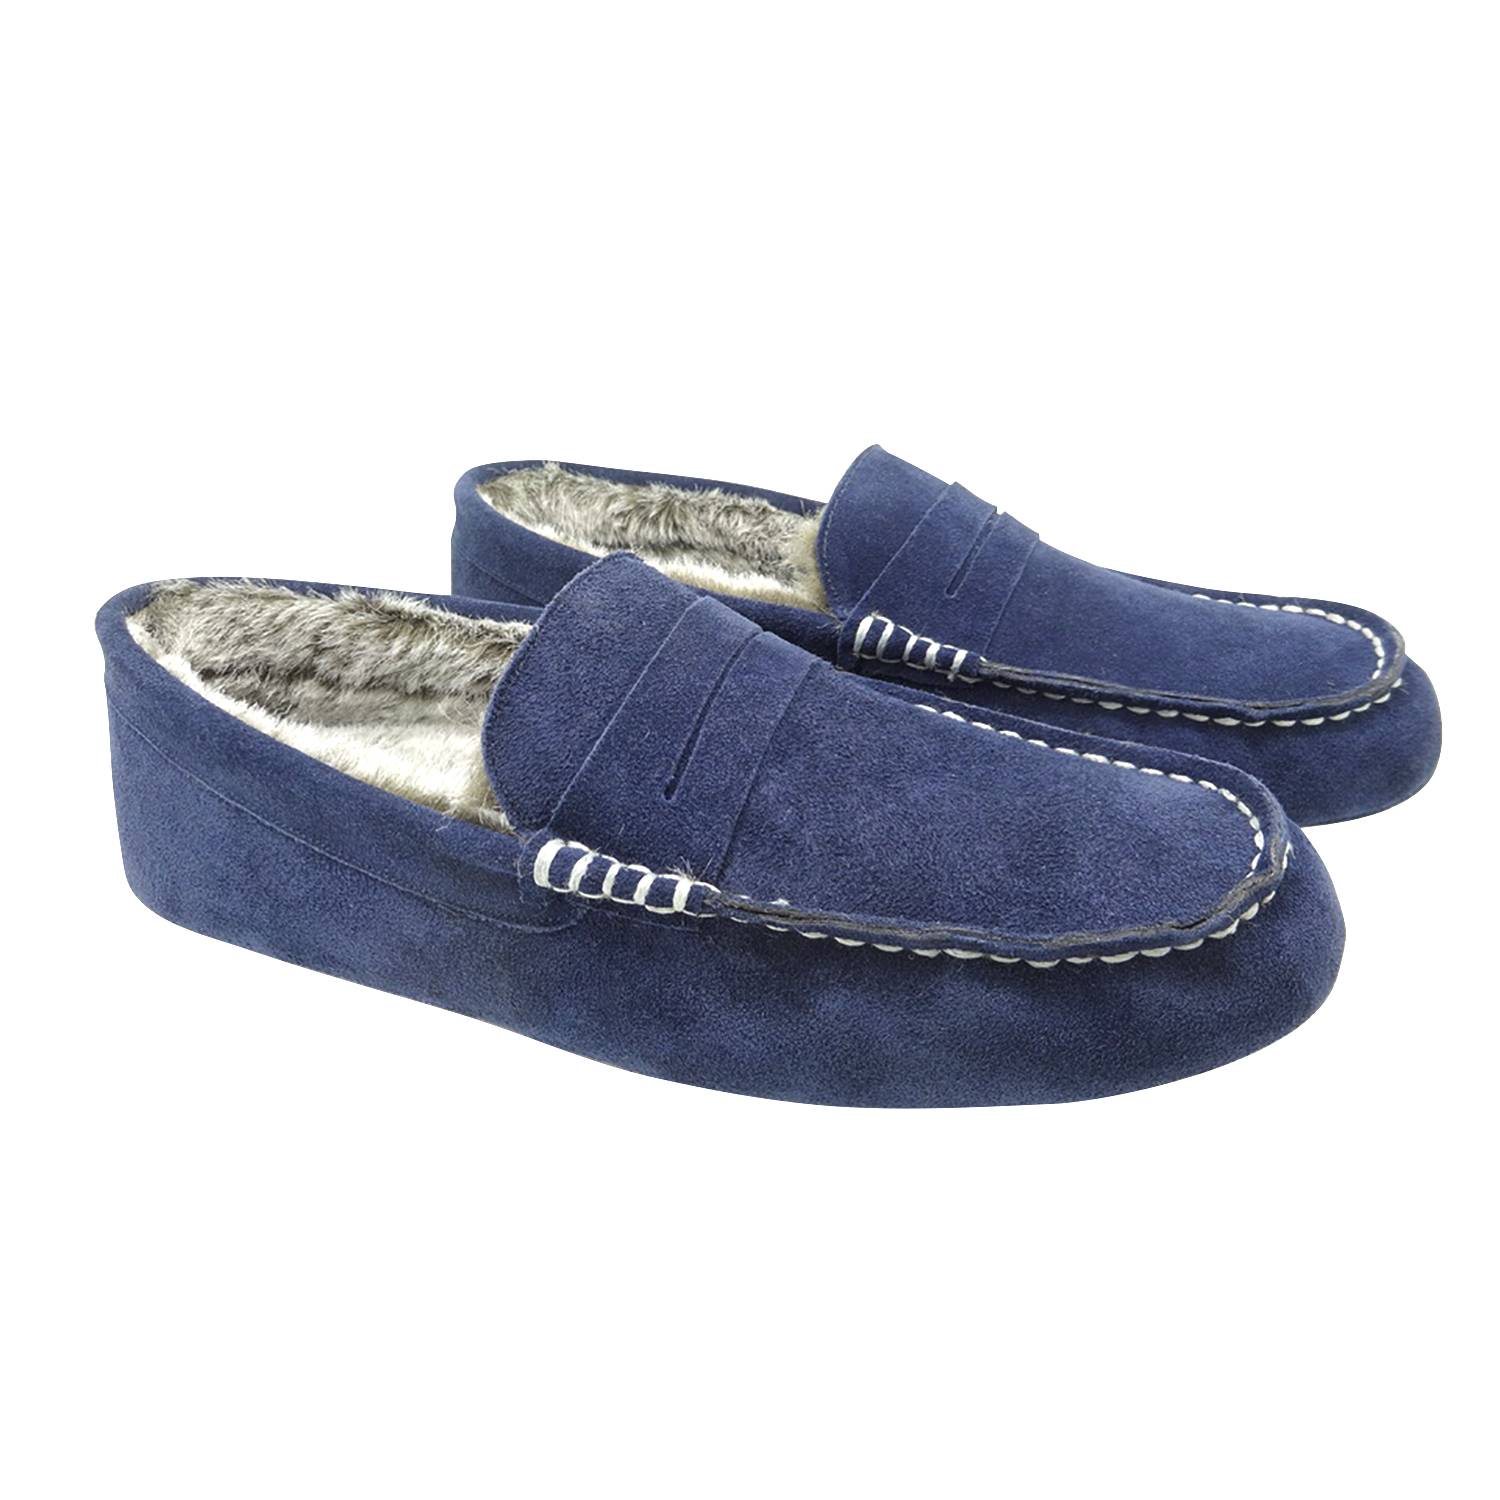 Mens Slippers Moccasins para sa Mga Lalaki Cosy Pile Lined with Microsuede Upper Indoor Outdoor On House Shoes